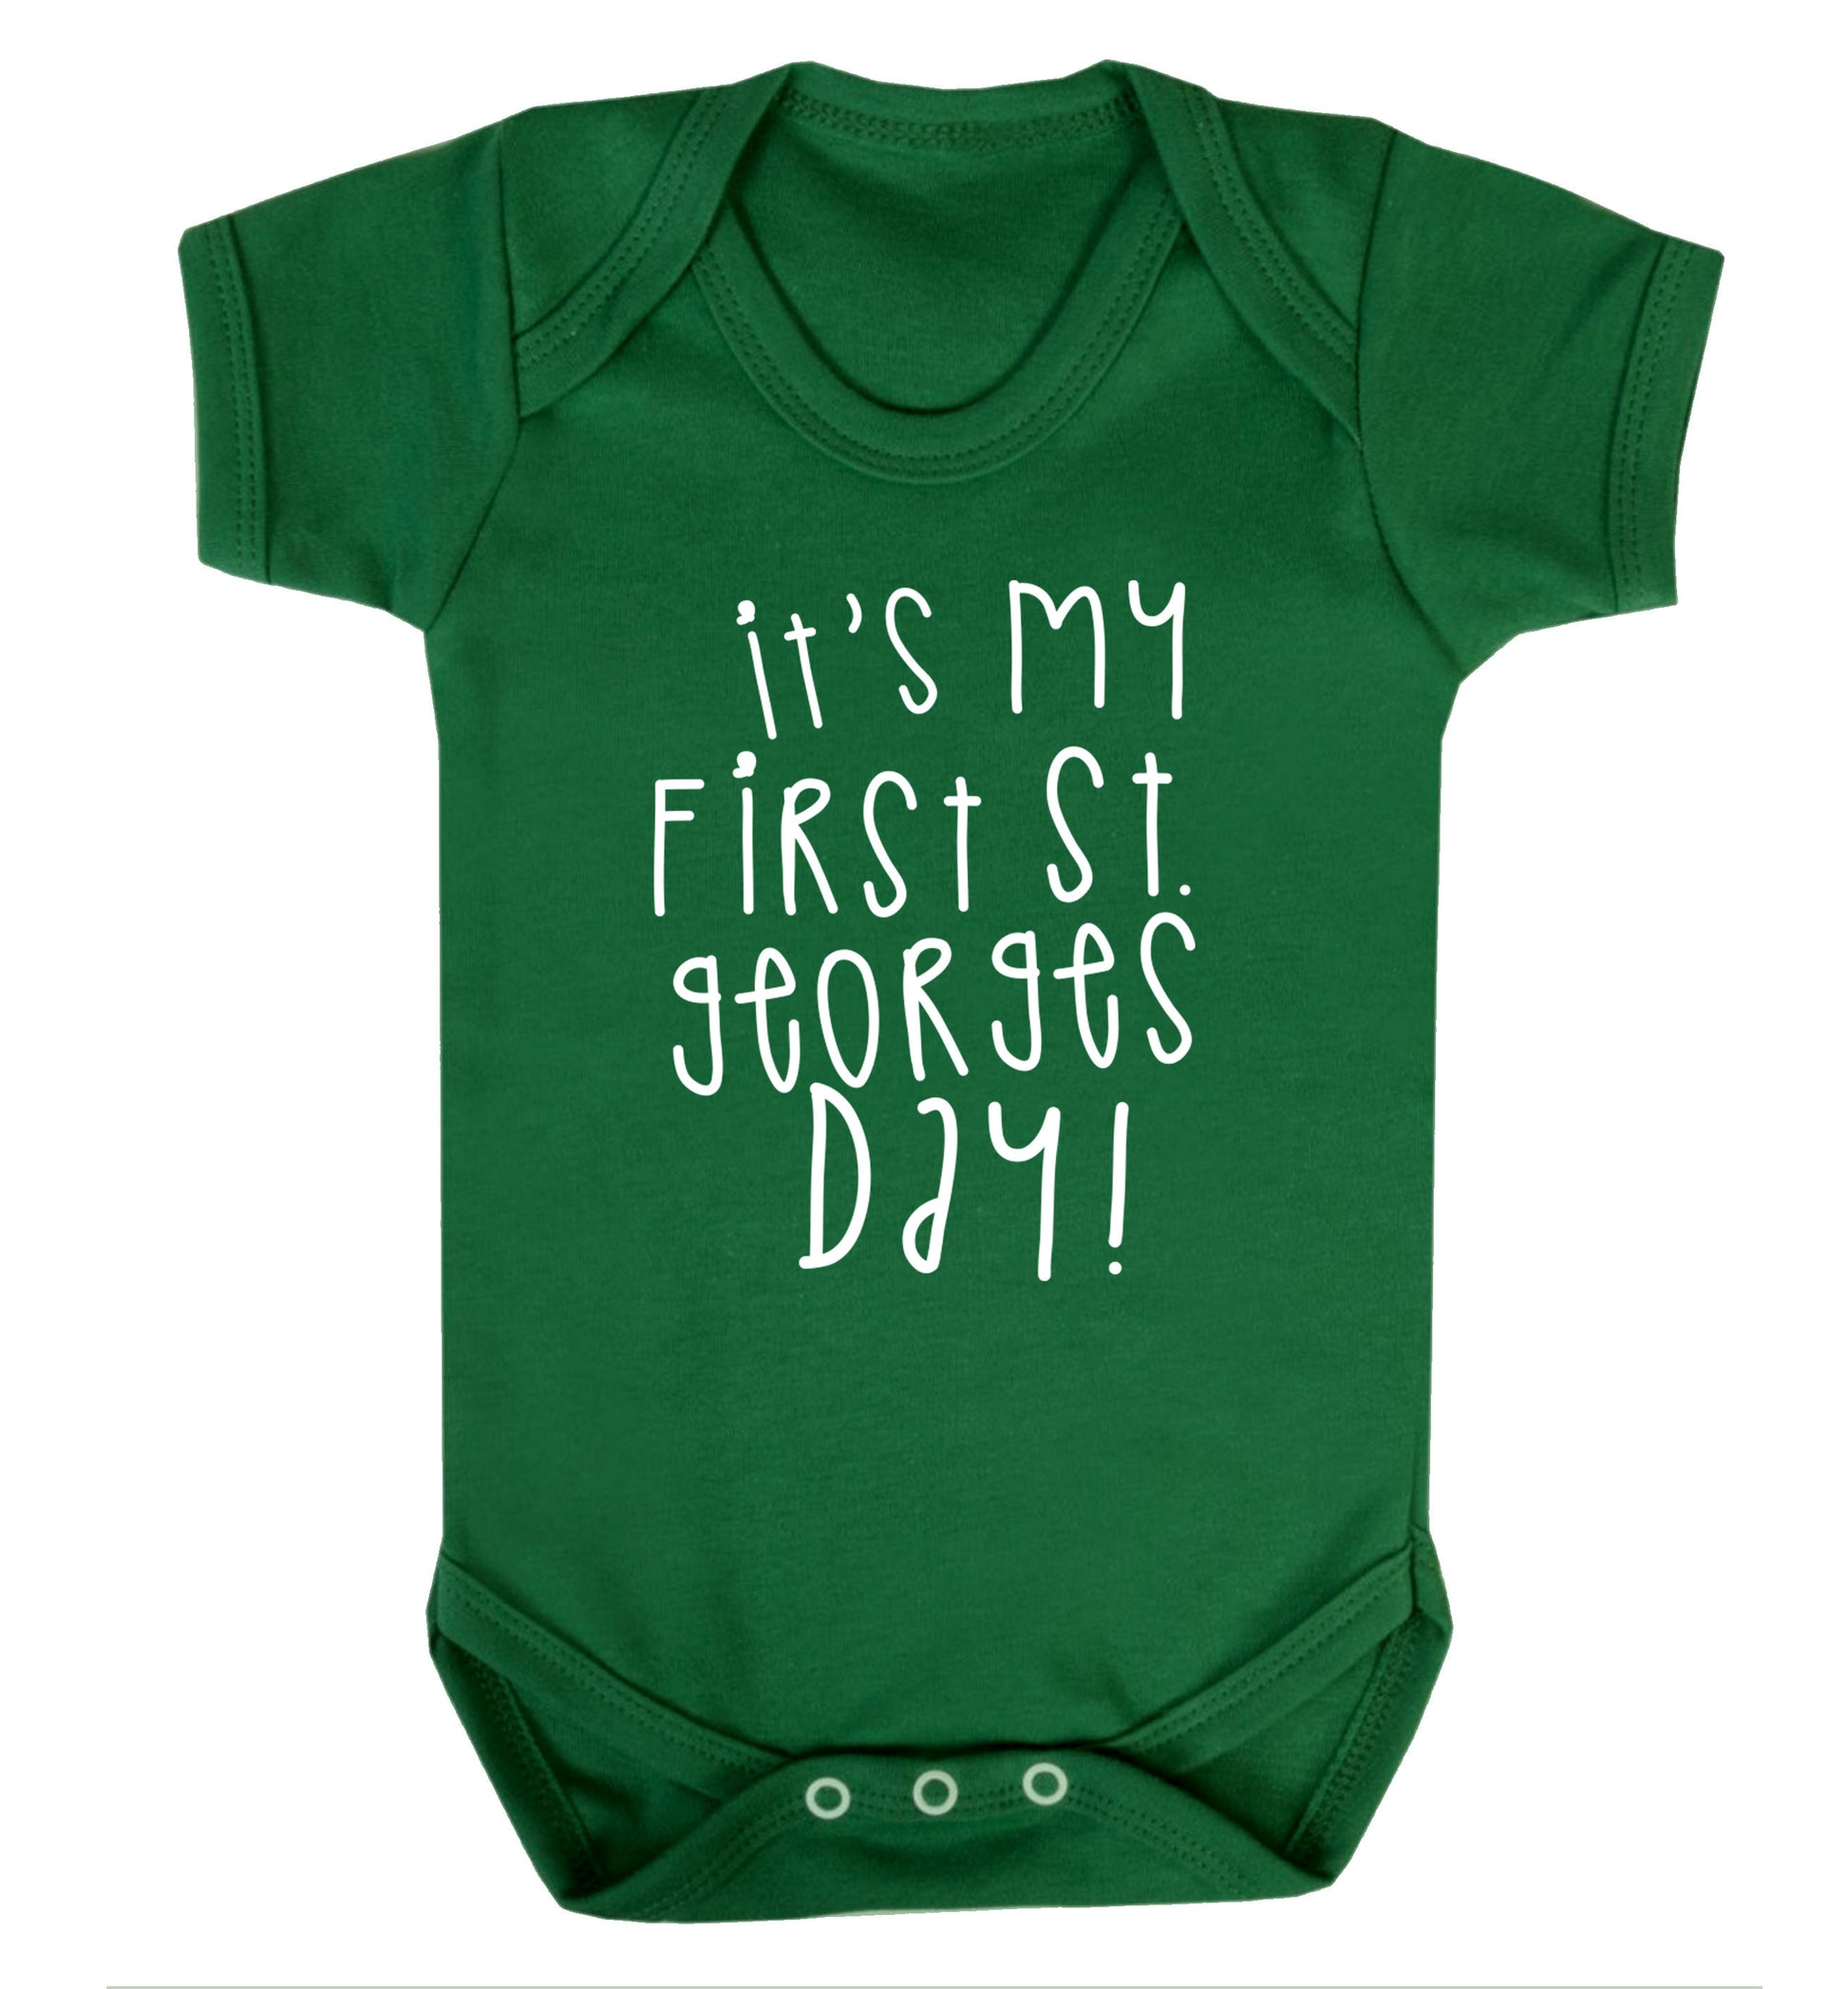 It's my first St Georges day Baby Vest green 18-24 months